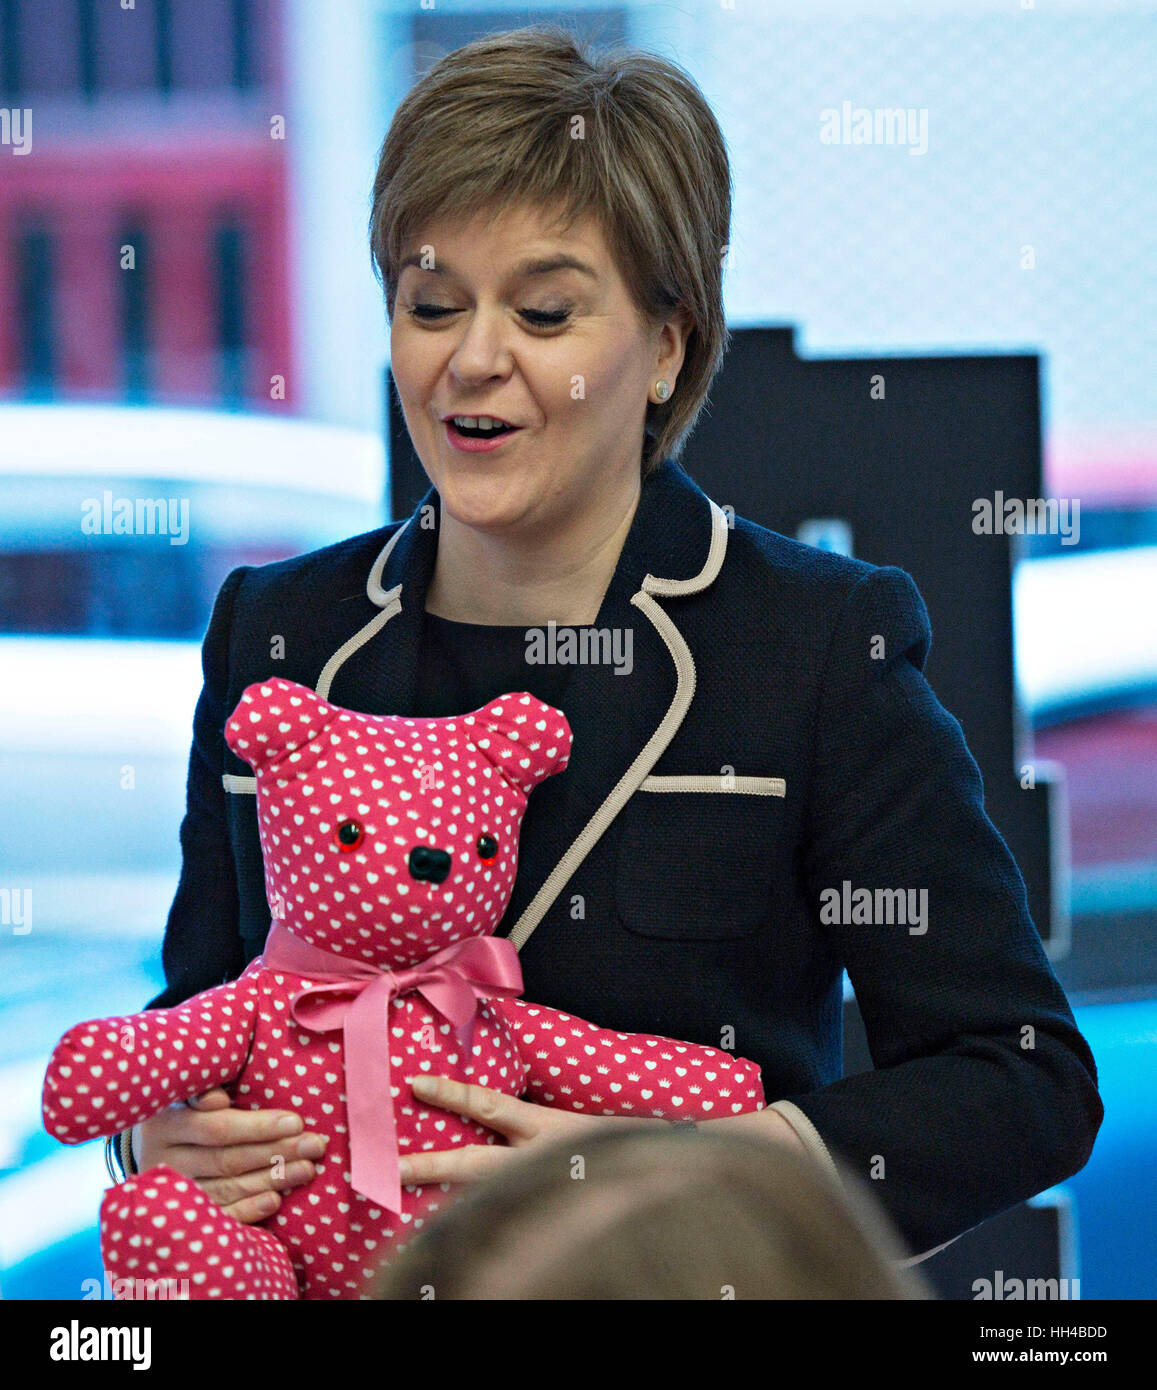 Scotland's First Minister Nicola Sturgeon visits Plantation Productions in Govan to announce £29 million funding to tackle poverty and improve people's lives including £18.9 million of direct Scottish government funding being put into a new Aspiring Communities Fund to help organisations find new, long lasting solutions to poverty. Stock Photo